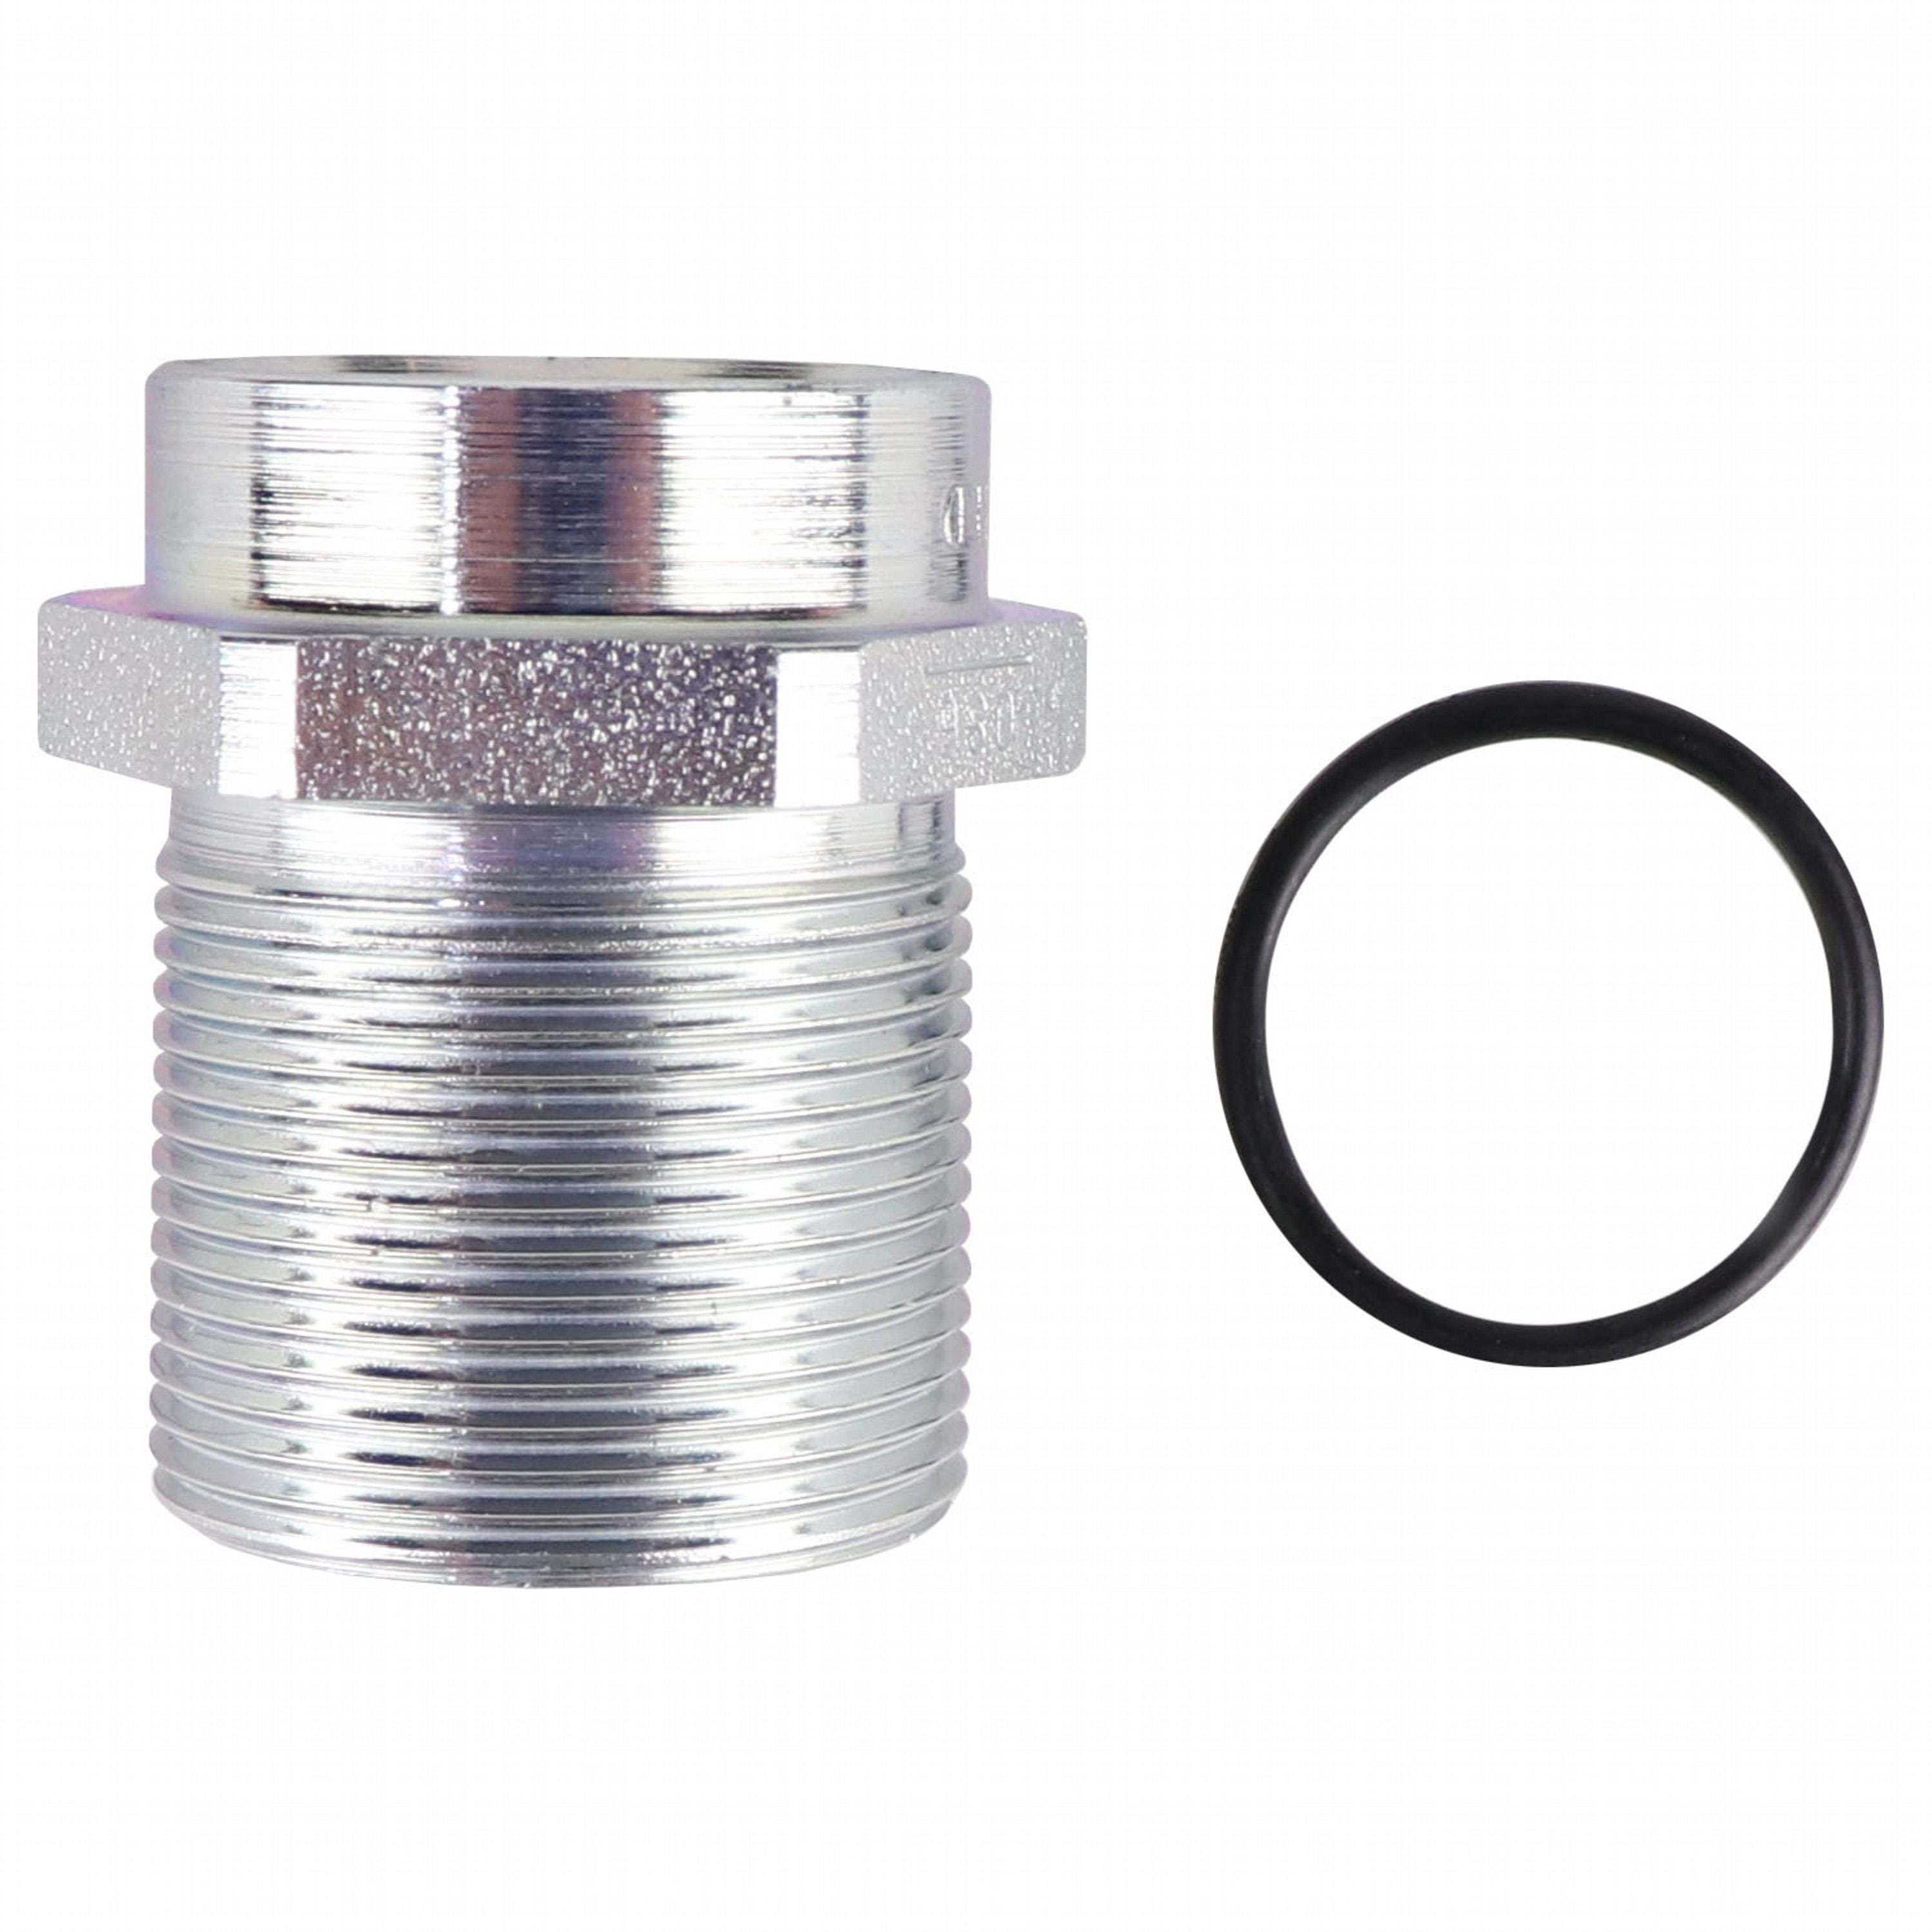 Male Quick Disconnect Coupling, #8 (3/4")